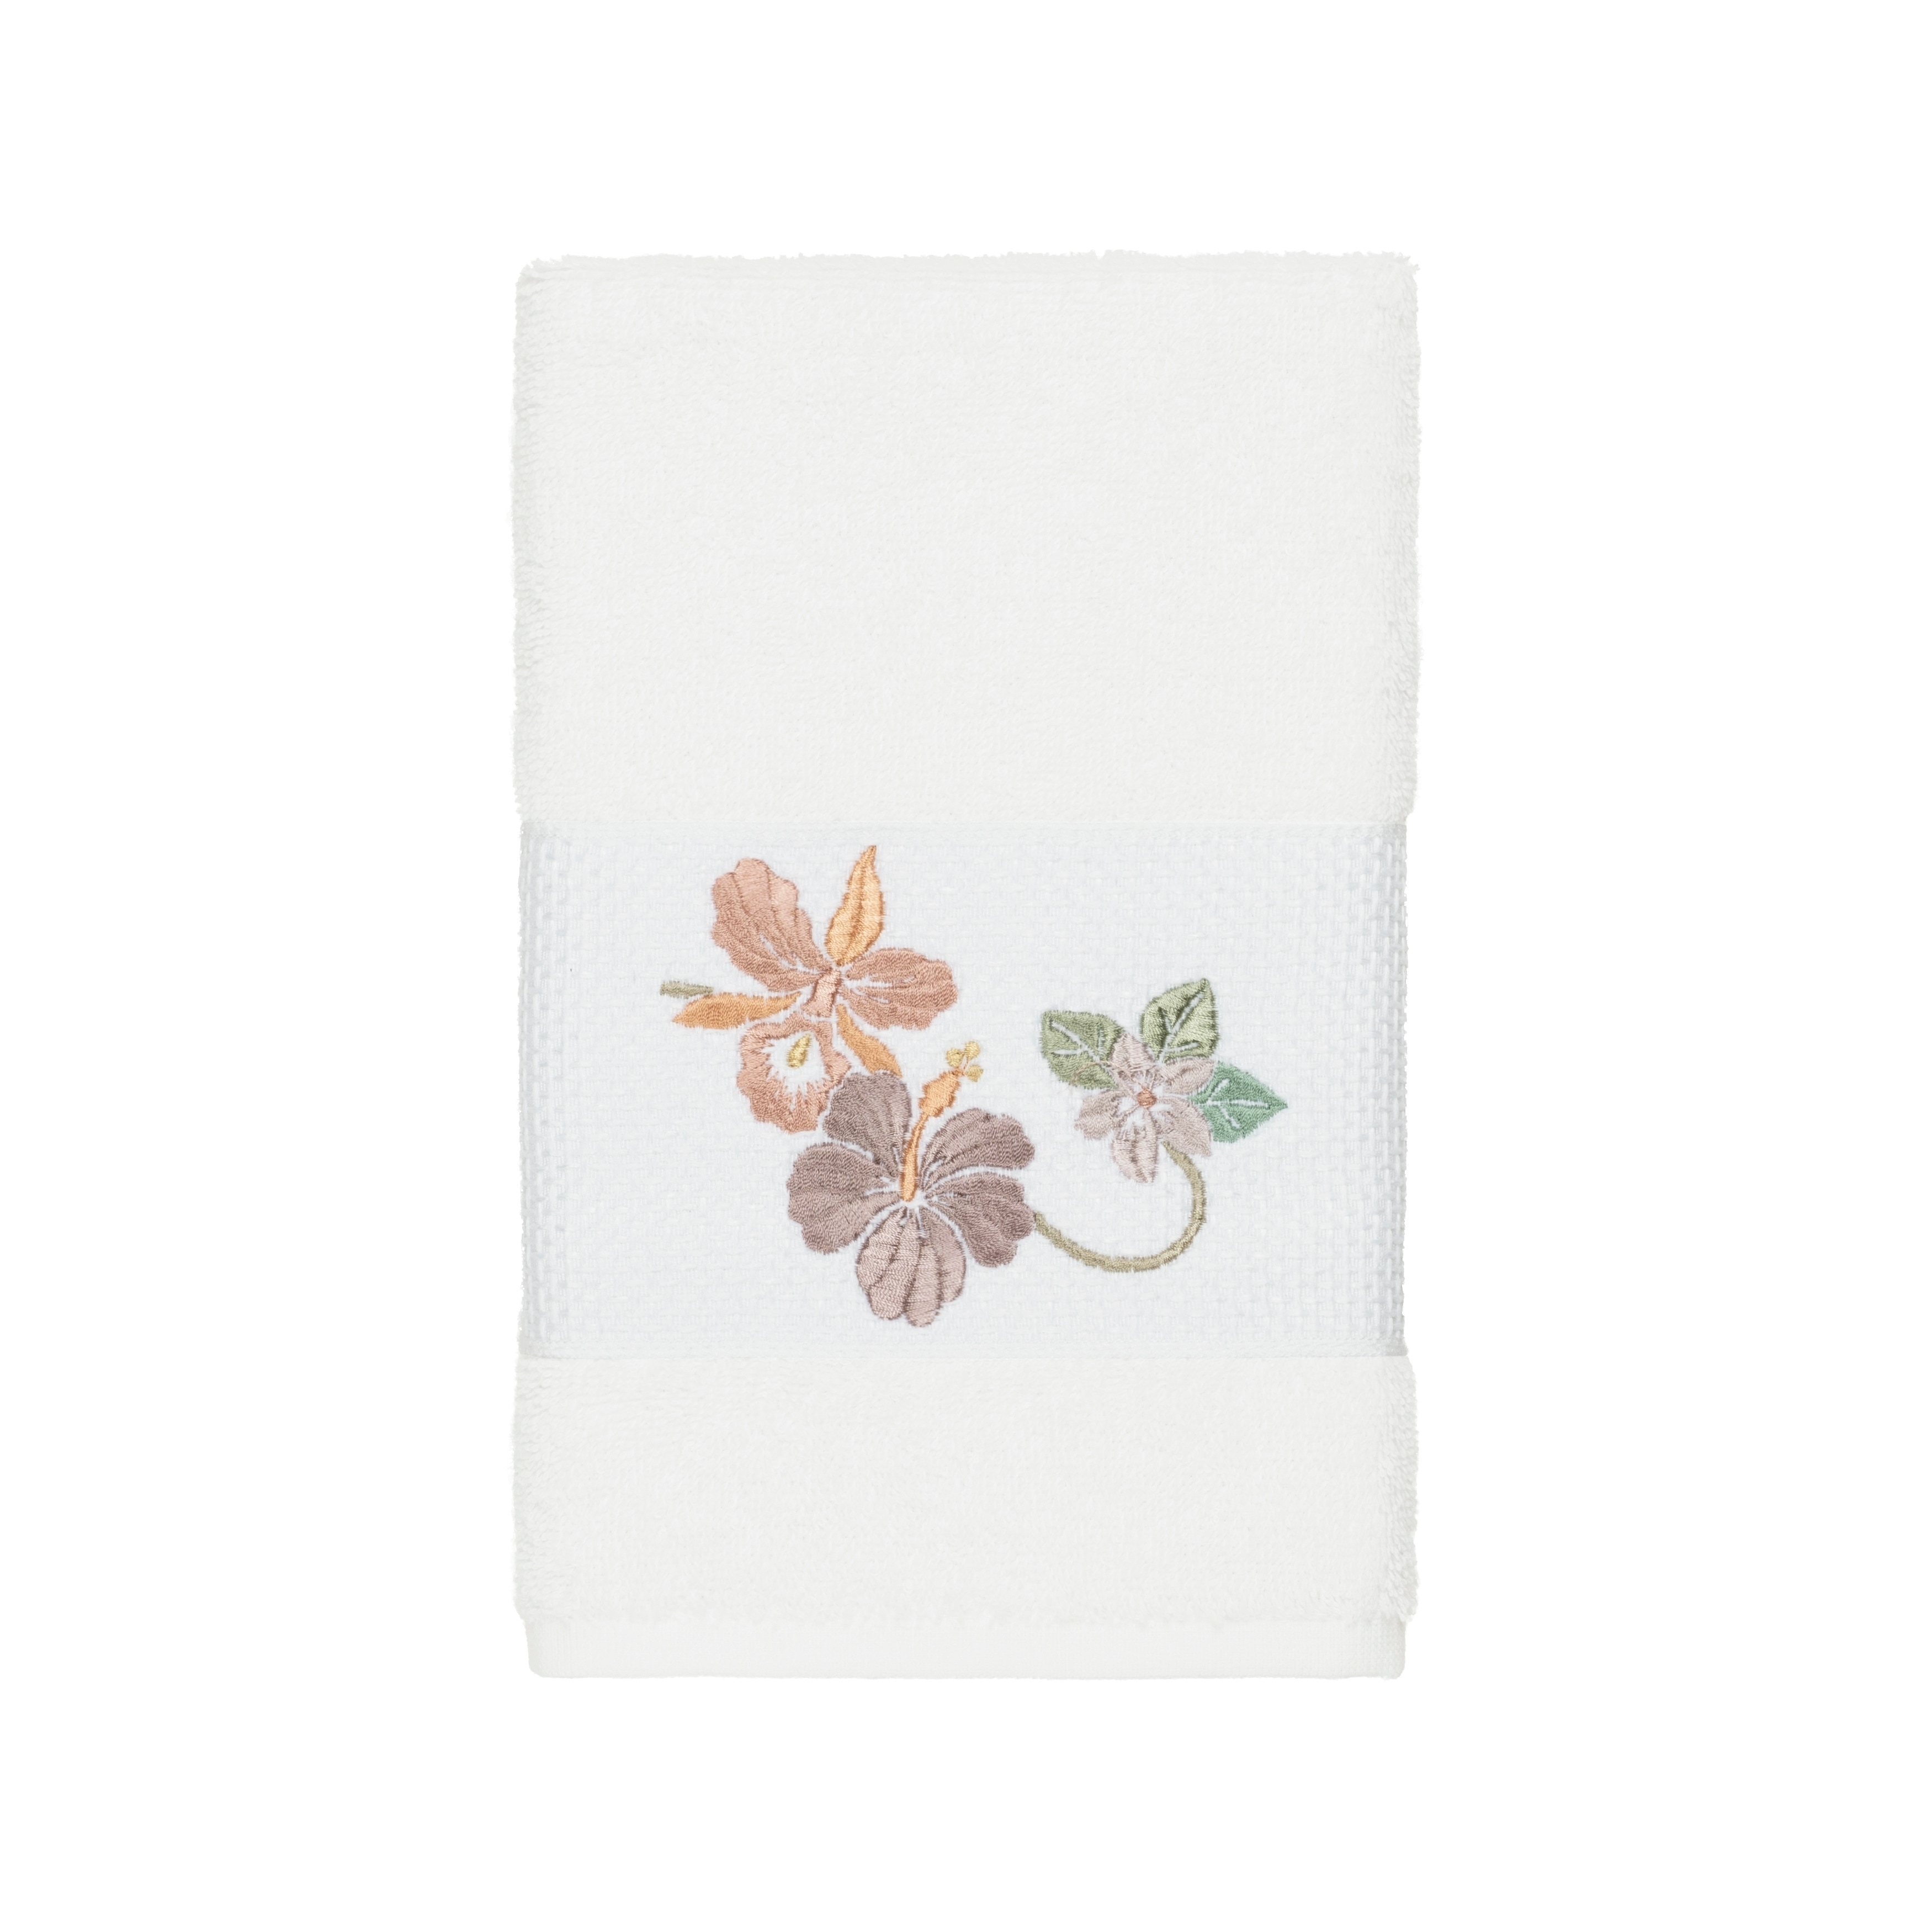 https://ak1.ostkcdn.com/images/products/21861466/Authentic-Hotel-and-Spa-Turkish-Cotton-Floral-Vine-Embroidered-White-Hand-Towel-57794b3f-d2be-4490-b60b-a98aa88b32f6.jpg